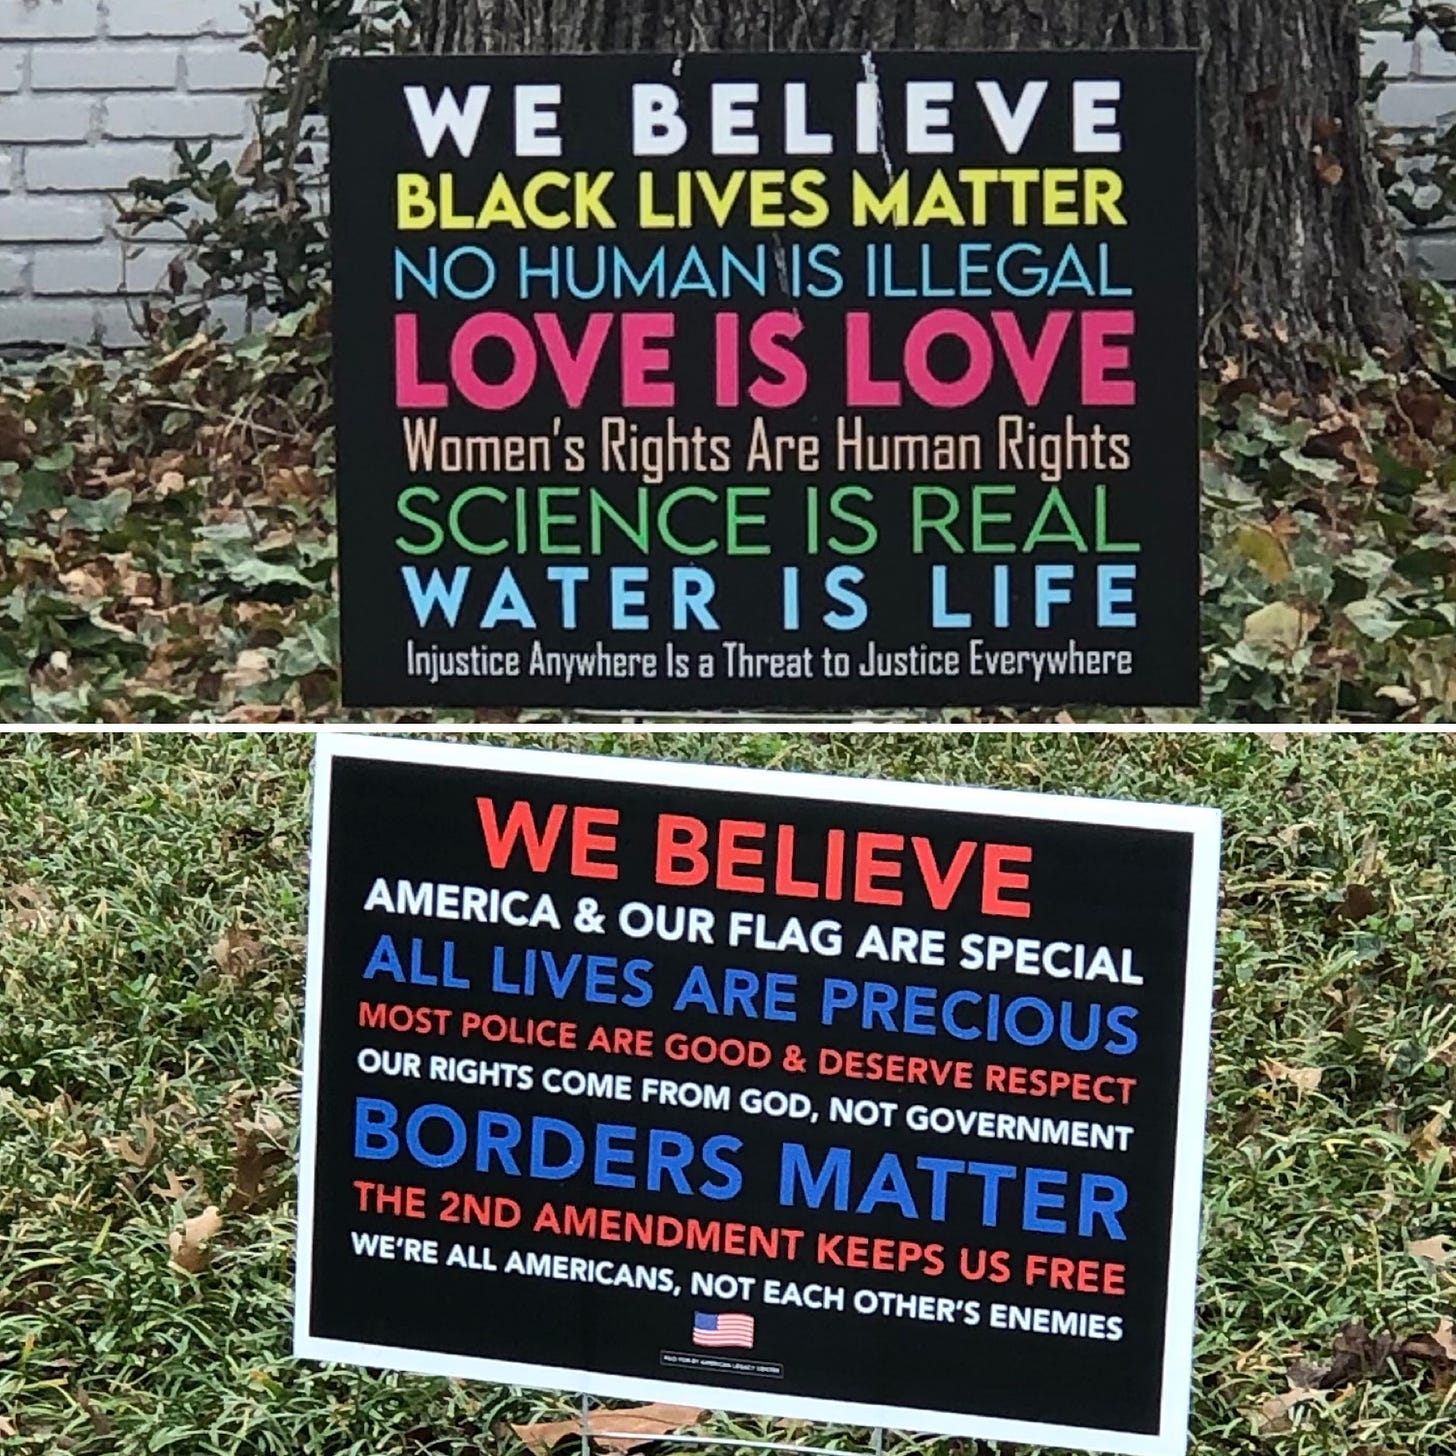 This is a split image with an upper half and a lower half. In the upper half is a yard sign that says WE BELIEVE BLACK LIVES MATTER, NO HUMAN IS ILLEGAL, LOVE IS LOVE, WOMEN’S RIGHTS ARE HUMAN RIGHTS, SCIENCE IS REAL, WATER IS LIFE, INJUSTICE ANYWHERE IS A THREAT TO JUSTICE EVERYWHERE. In the lower half is a yard sign that says WE BELIEVE AMERICA & OUR FLAG ARE SPECIAL, ALL LIVES ARE PRECIOUS, MOST POLICE ARE GOOD & DESERVE RESPECT, OUR RIGHTS COME FROM GOD, NOT GOVERNMENT, BORDERS MATTER, THE 2ND AMENDMENT KEEPS US FREE, WE’RE ALL AMERICANS, NOT EACH OTHER’S ENEMIES